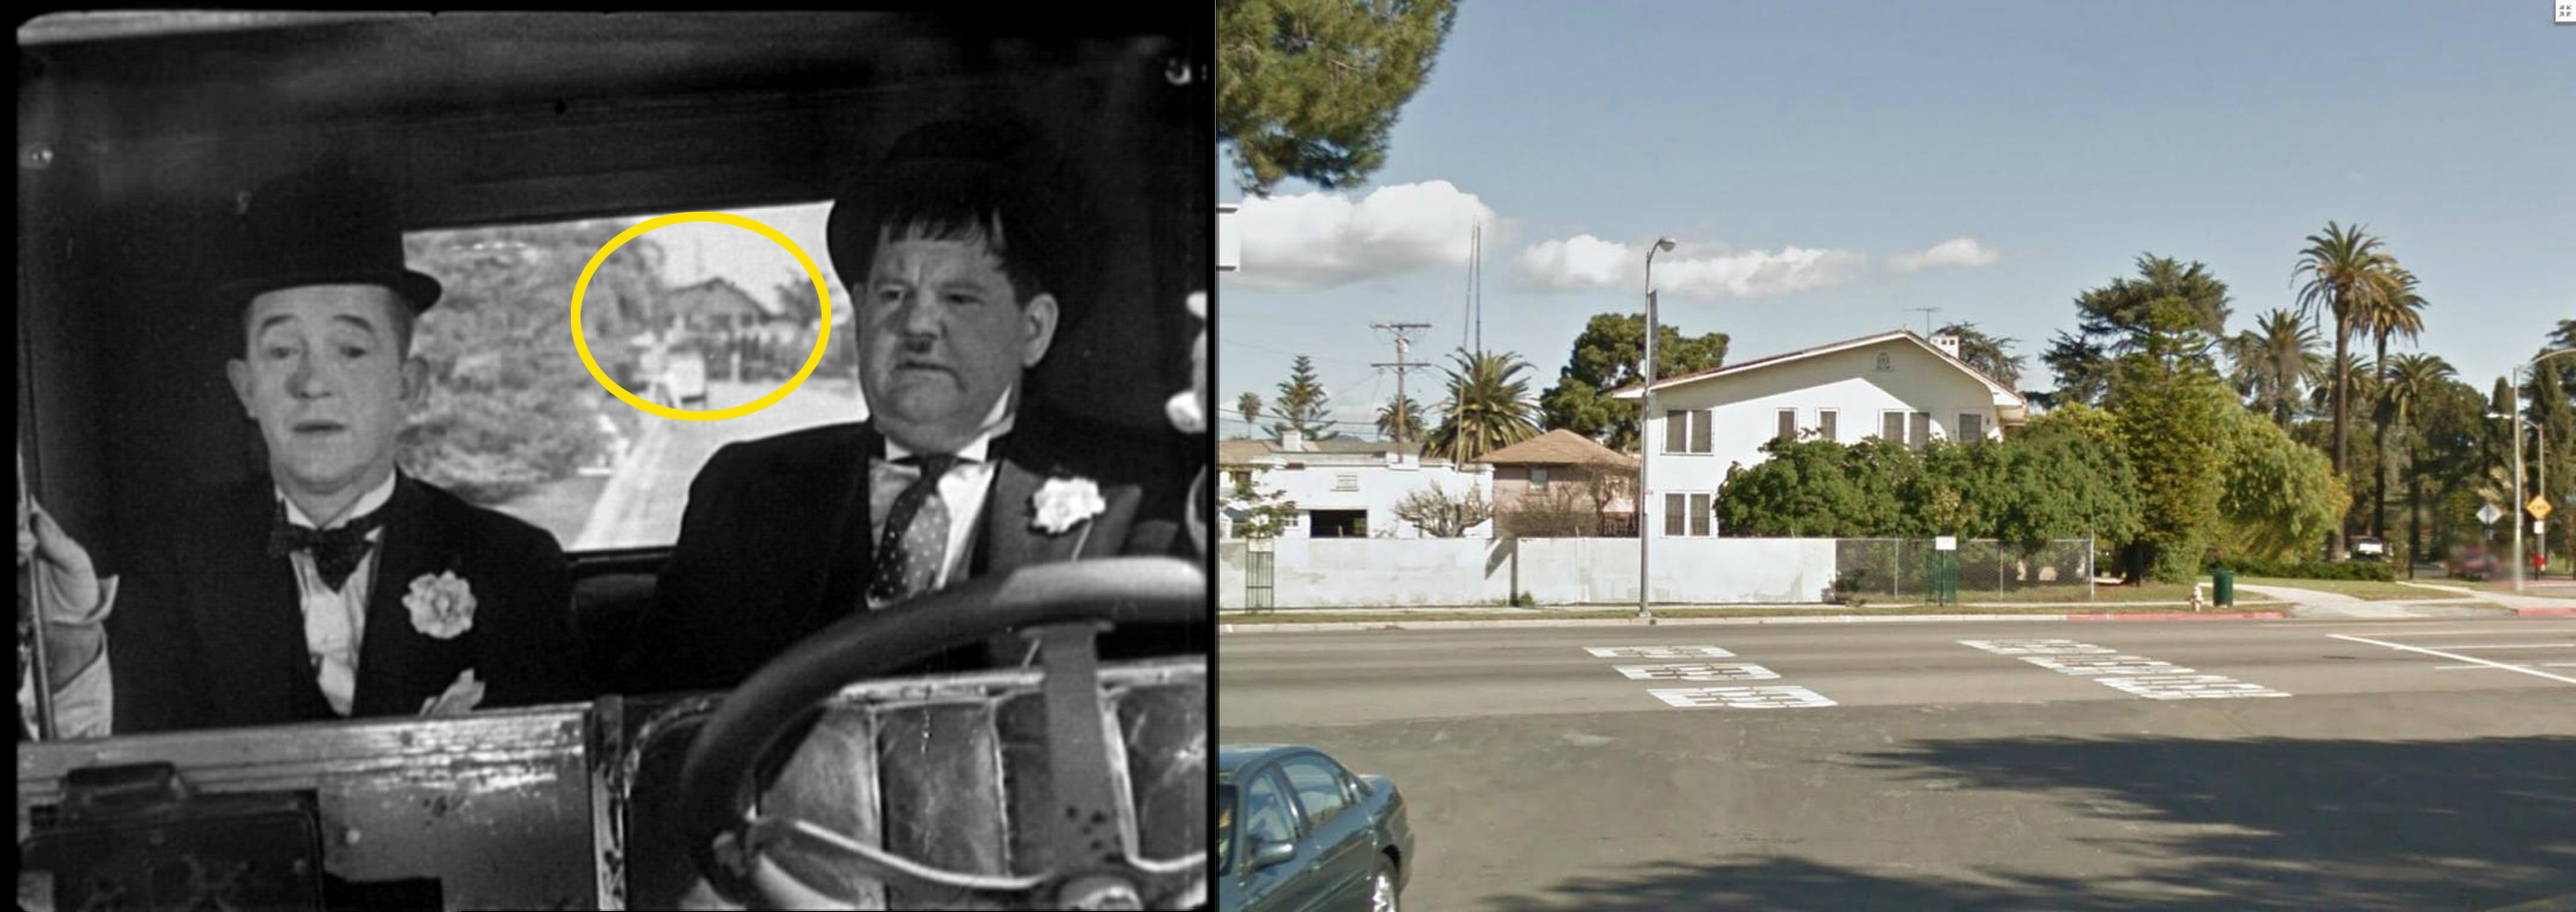 photos-of-laurel-and-hardy